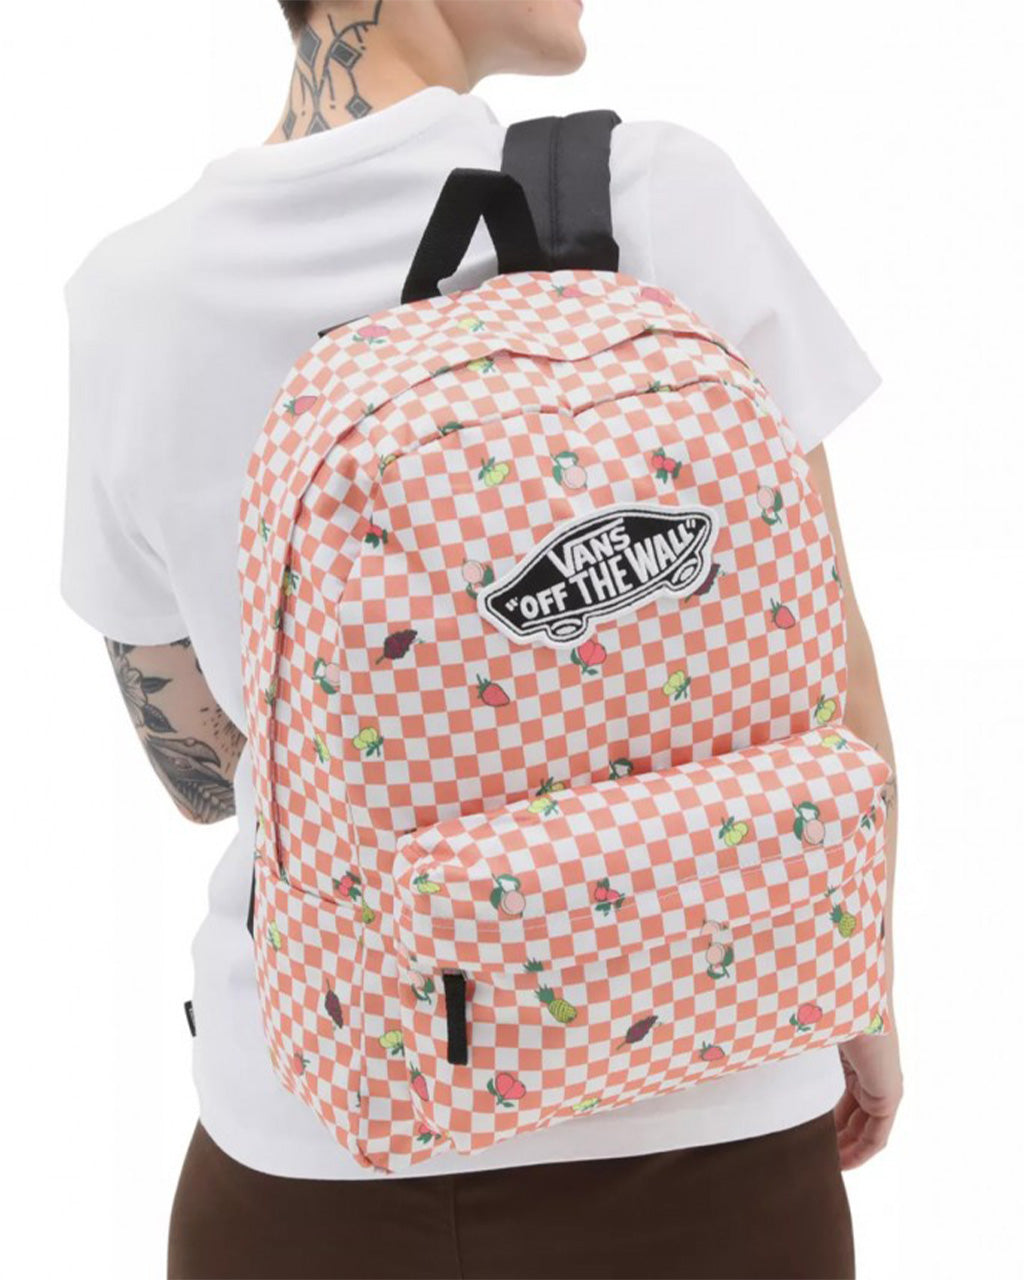 Lauw Monografie Verfrissend Realm Backpack - Checkerboard Fruit – ban.do